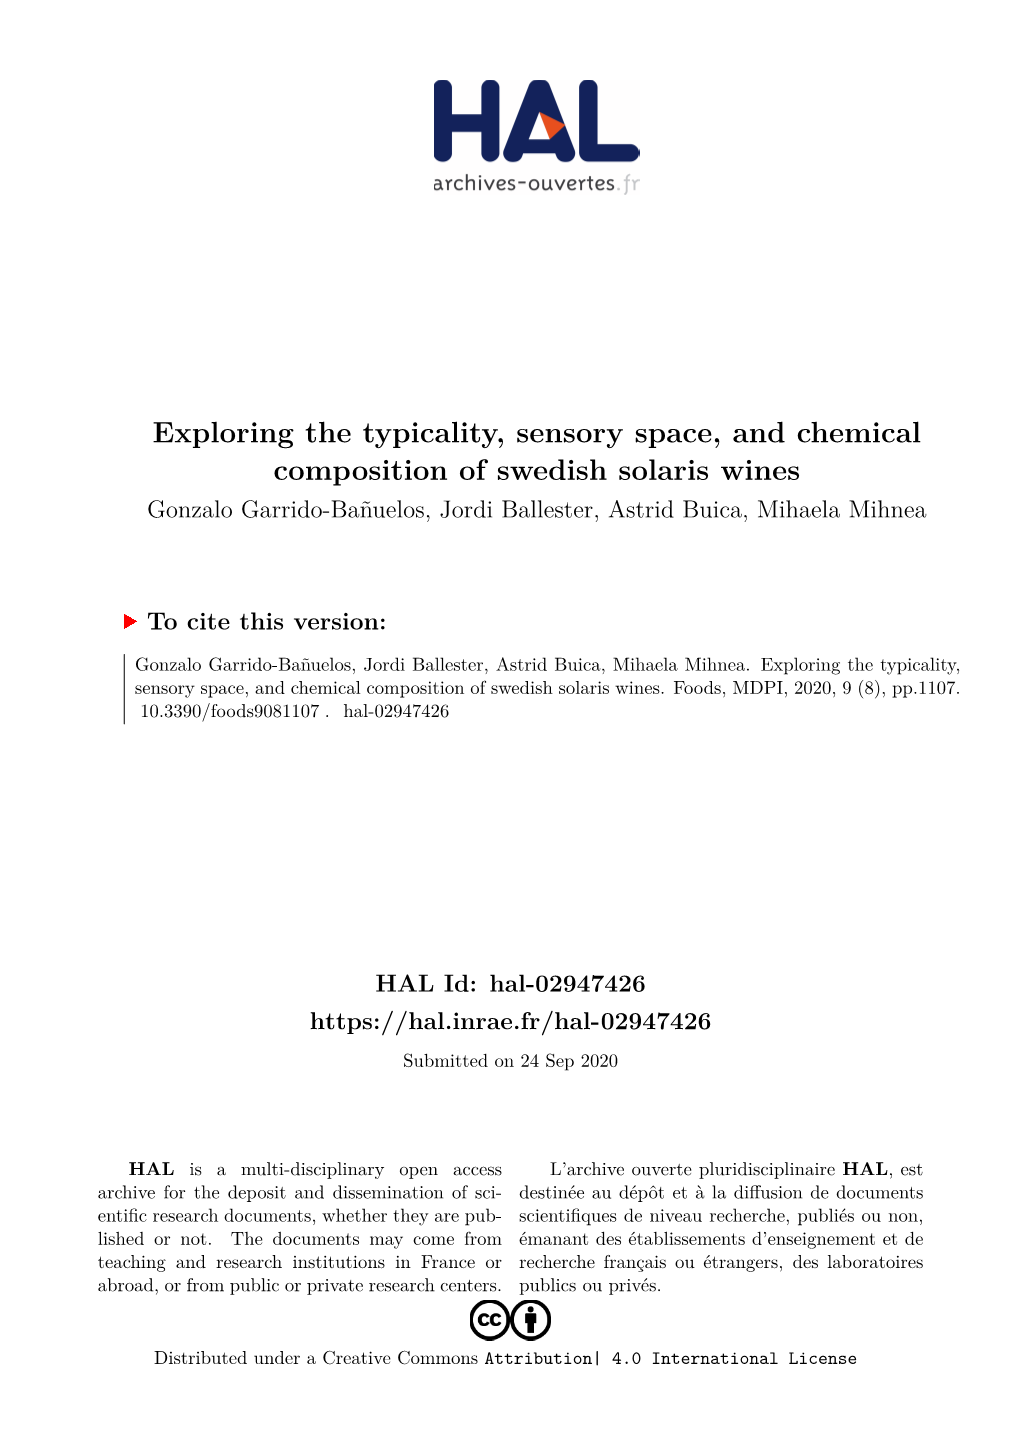 Exploring the Typicality, Sensory Space, and Chemical Composition of Swedish Solaris Wines Gonzalo Garrido-Bañuelos, Jordi Ballester, Astrid Buica, Mihaela Mihnea